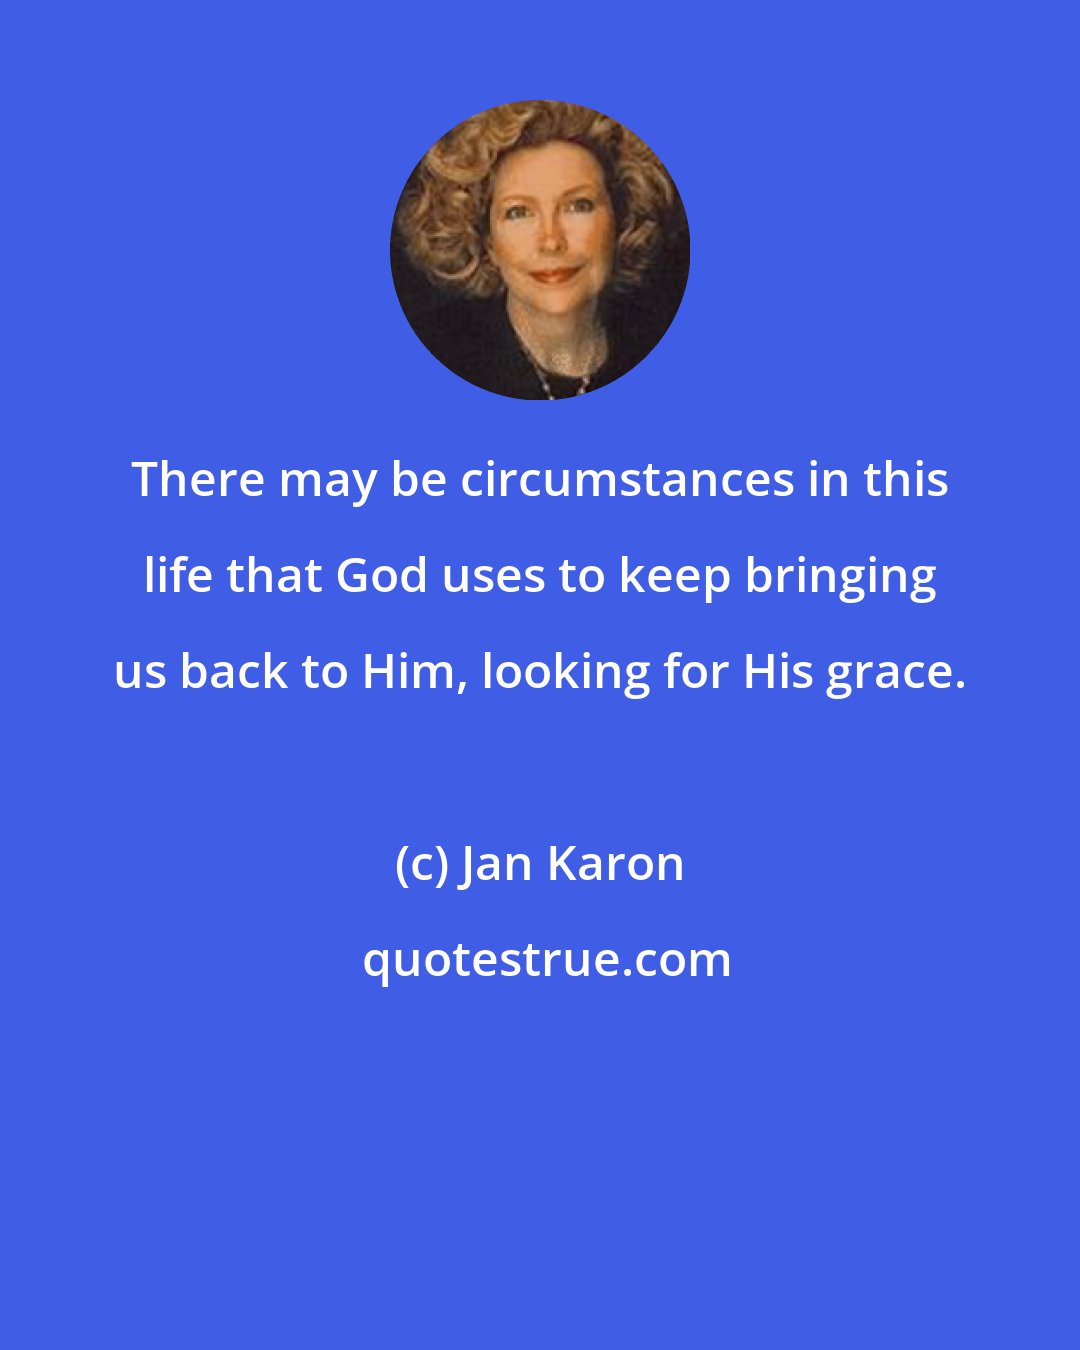 Jan Karon: There may be circumstances in this life that God uses to keep bringing us back to Him, looking for His grace.